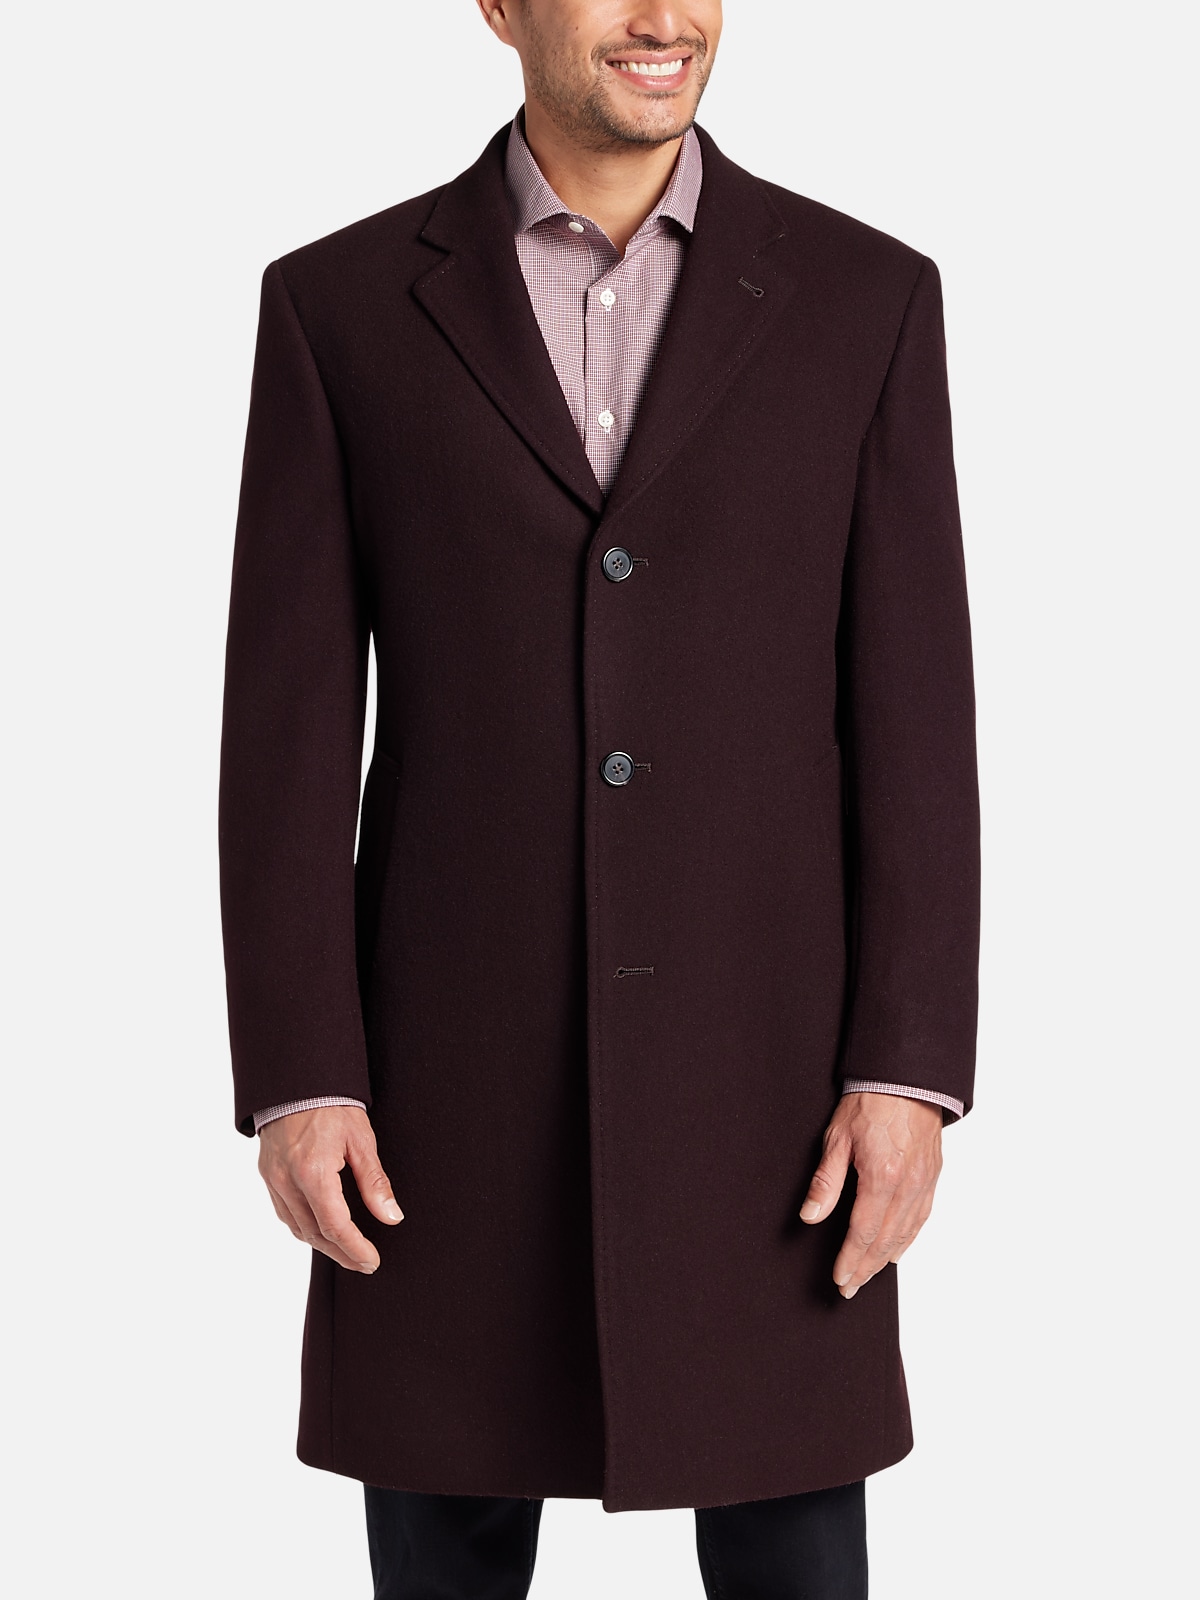 Michael Kors Classic Fit Topcoat | All Clearance $39.99| Men's Wearhouse